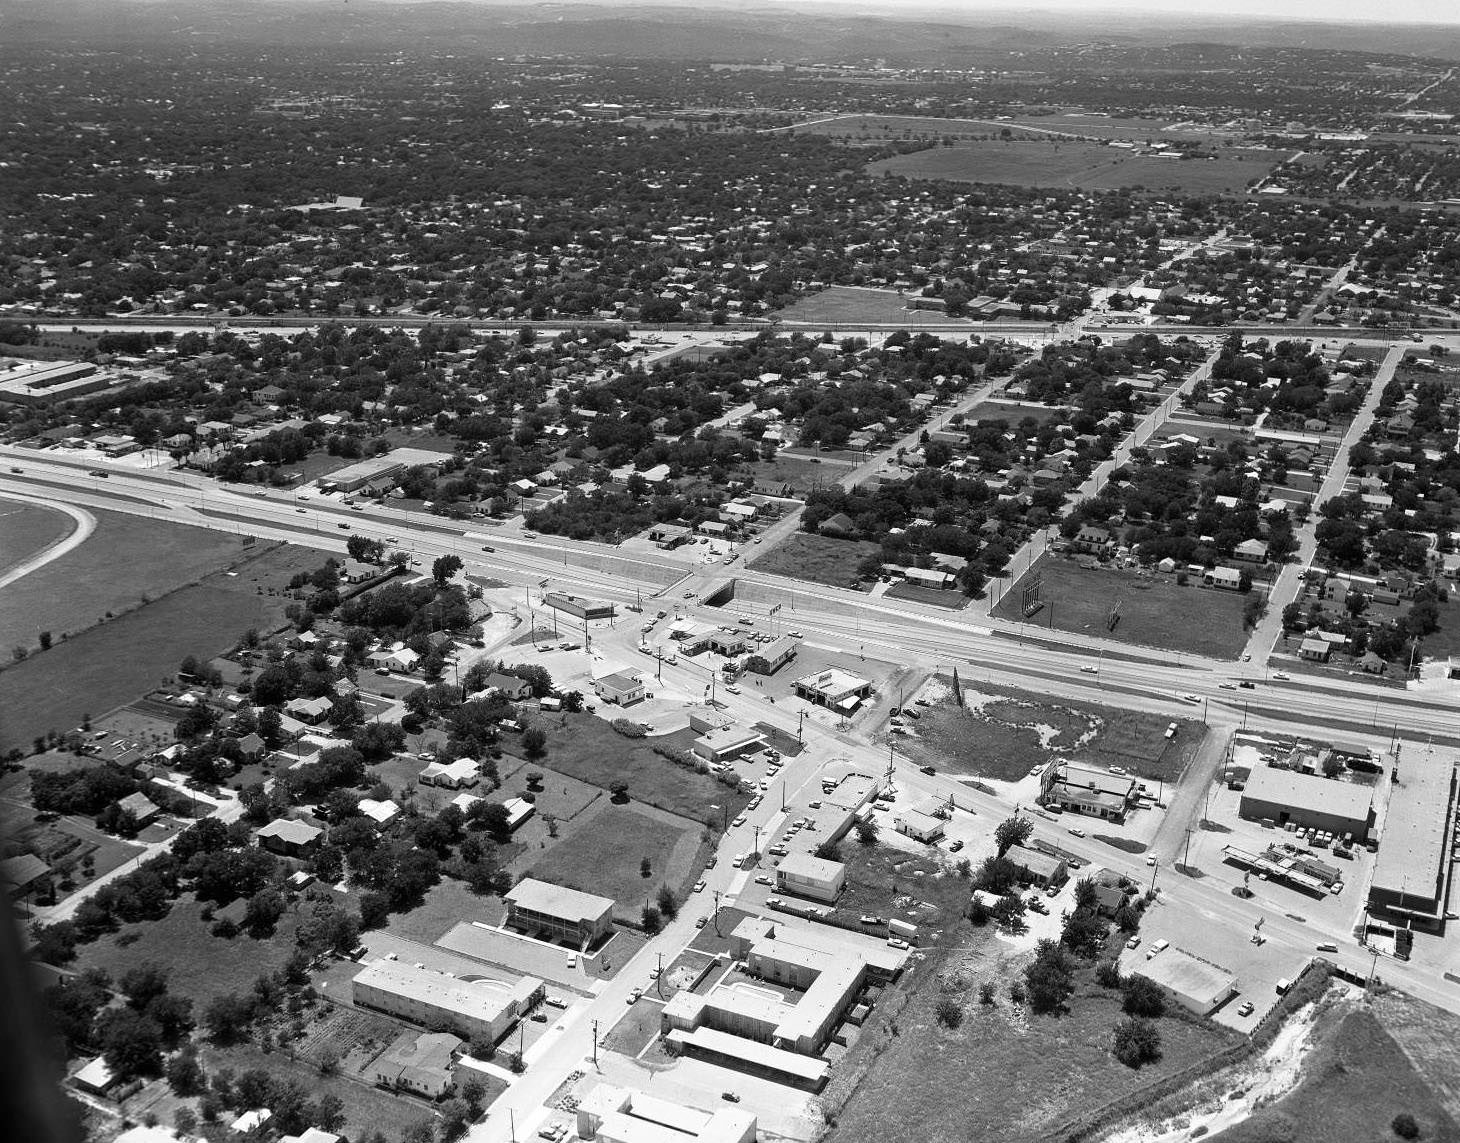 An aerial view of 51st Street and Interegional Highway, 1963